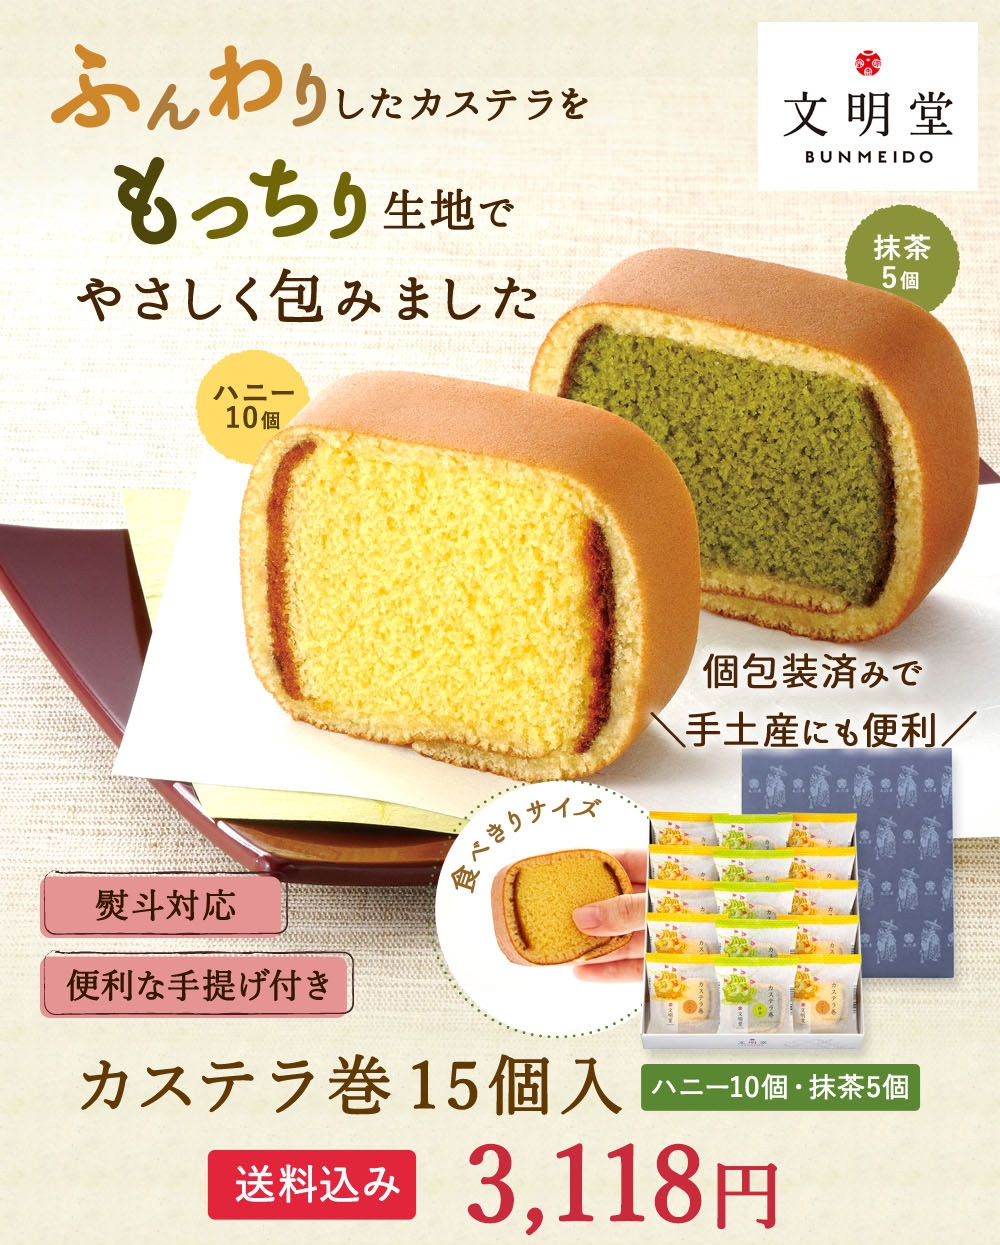  official writing Akira . castella volume 15 piece entering ( honey 10 piece, powdered green tea 5 piece ) Japanese confectionery piece packing assortment gift sweets celebration ..... Mother's Day 